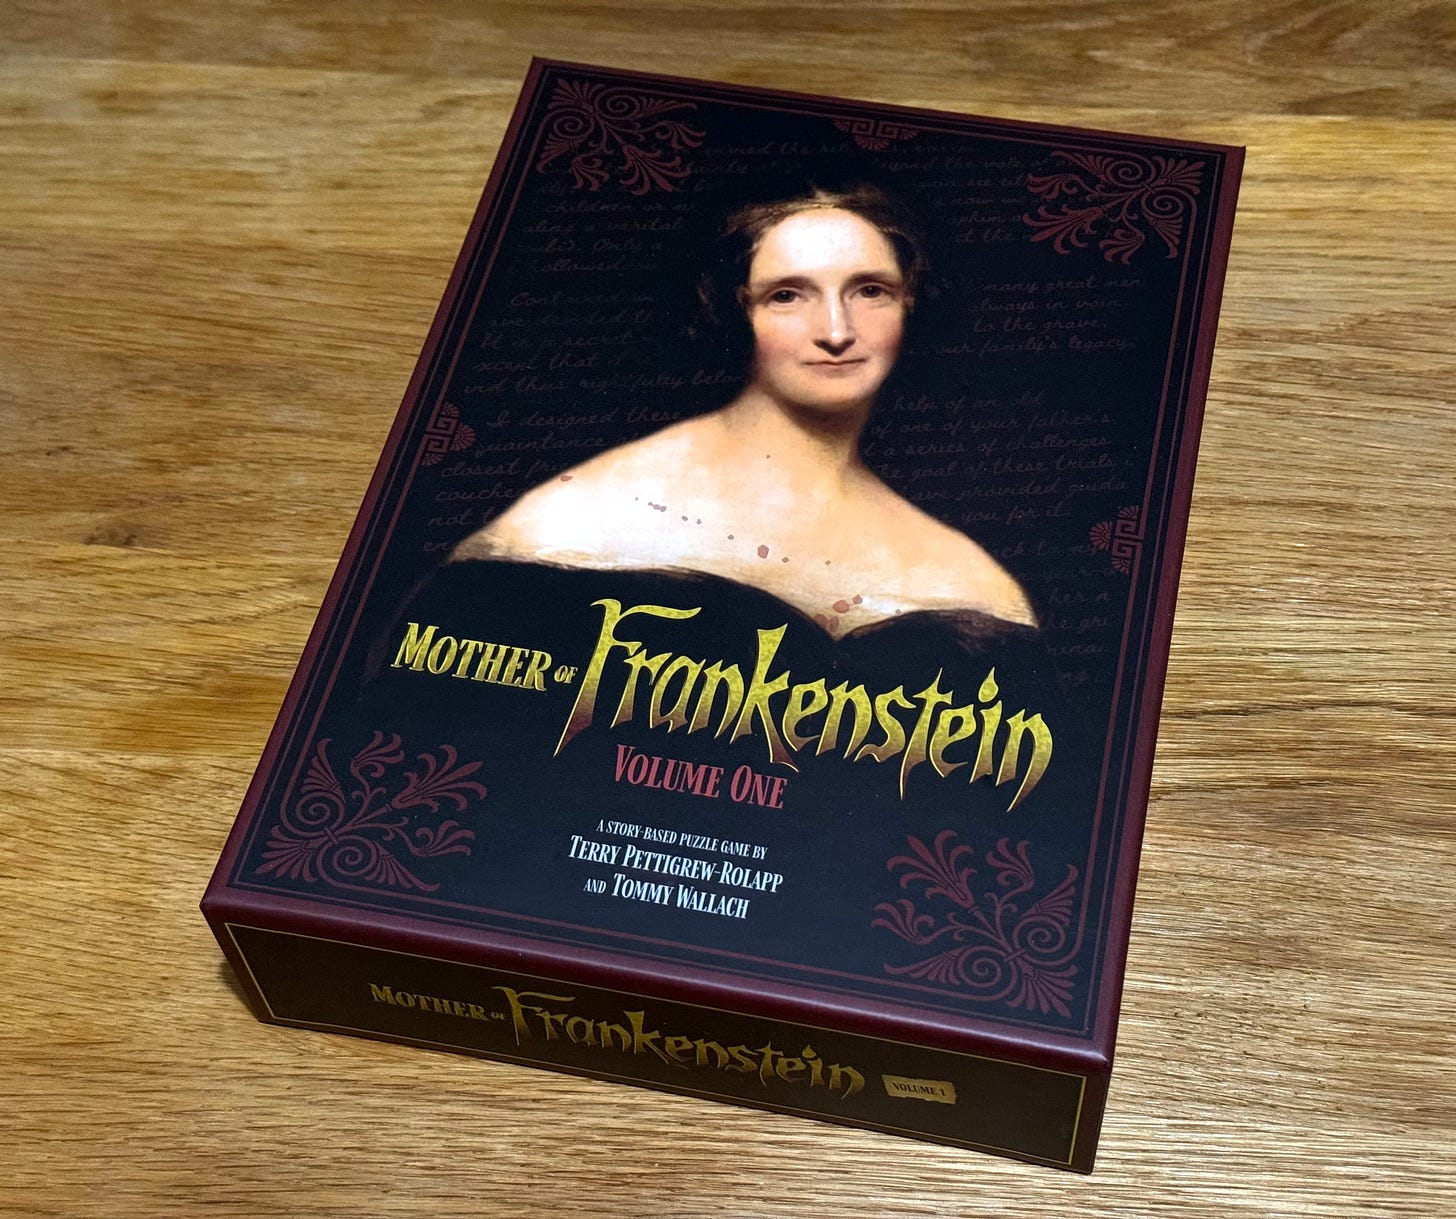 The box of Mother of Frankenstein: Volume One, with a portrait of Mary Shelley on the front